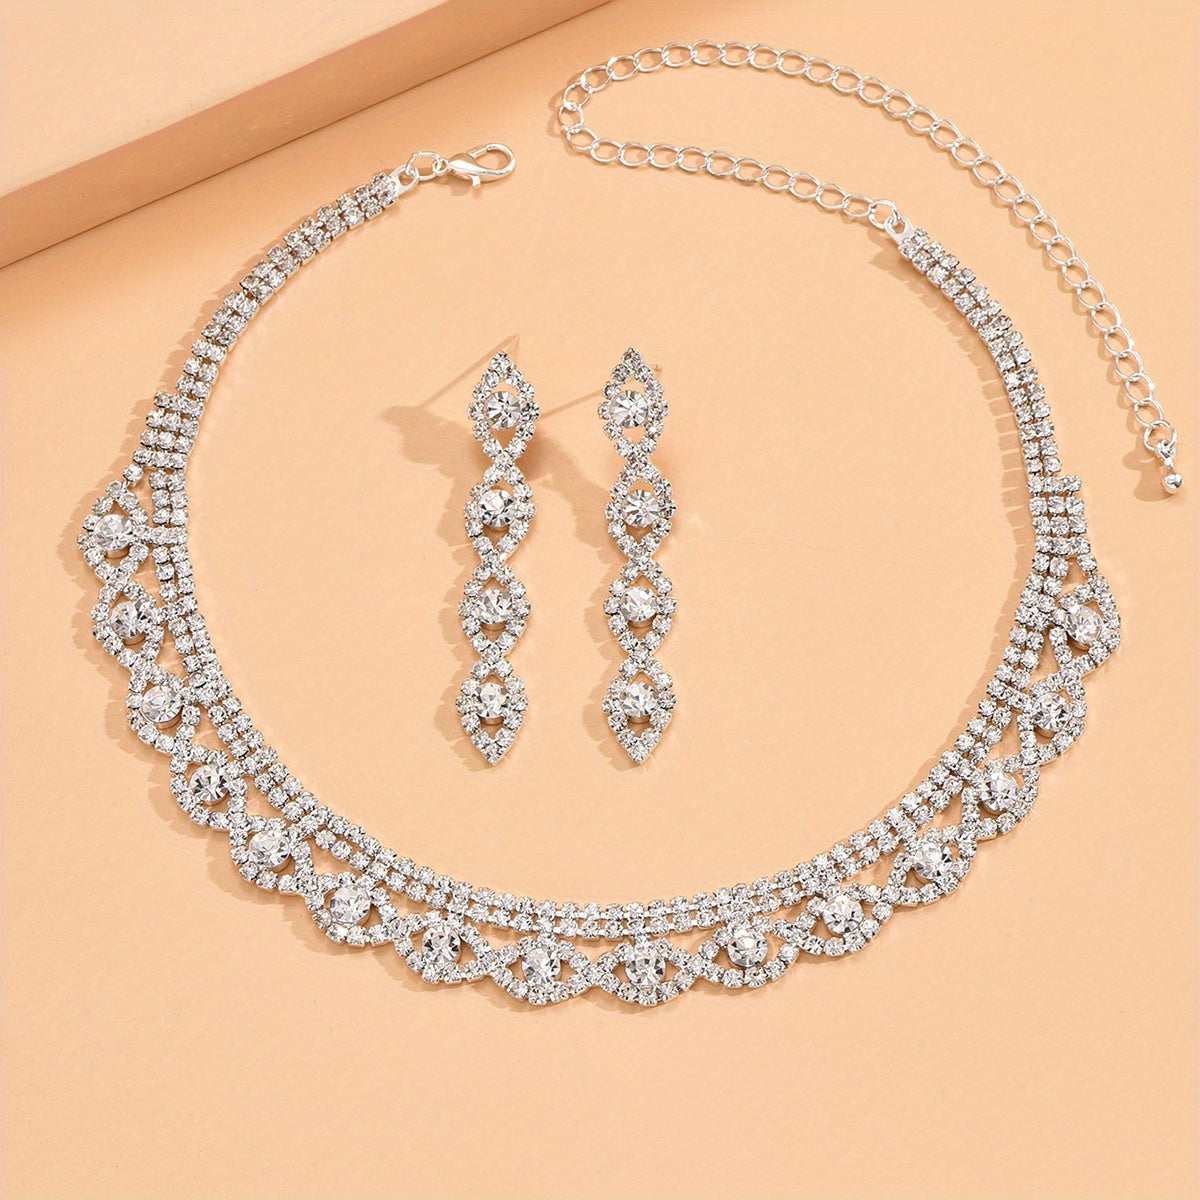 3pcs Earrings Plus Necklace Elegant Jewelry Set Inlaid Rhinestone Silver Plated Dainty Evening Party Decor Perfect Chrismas Gift For Your Girl